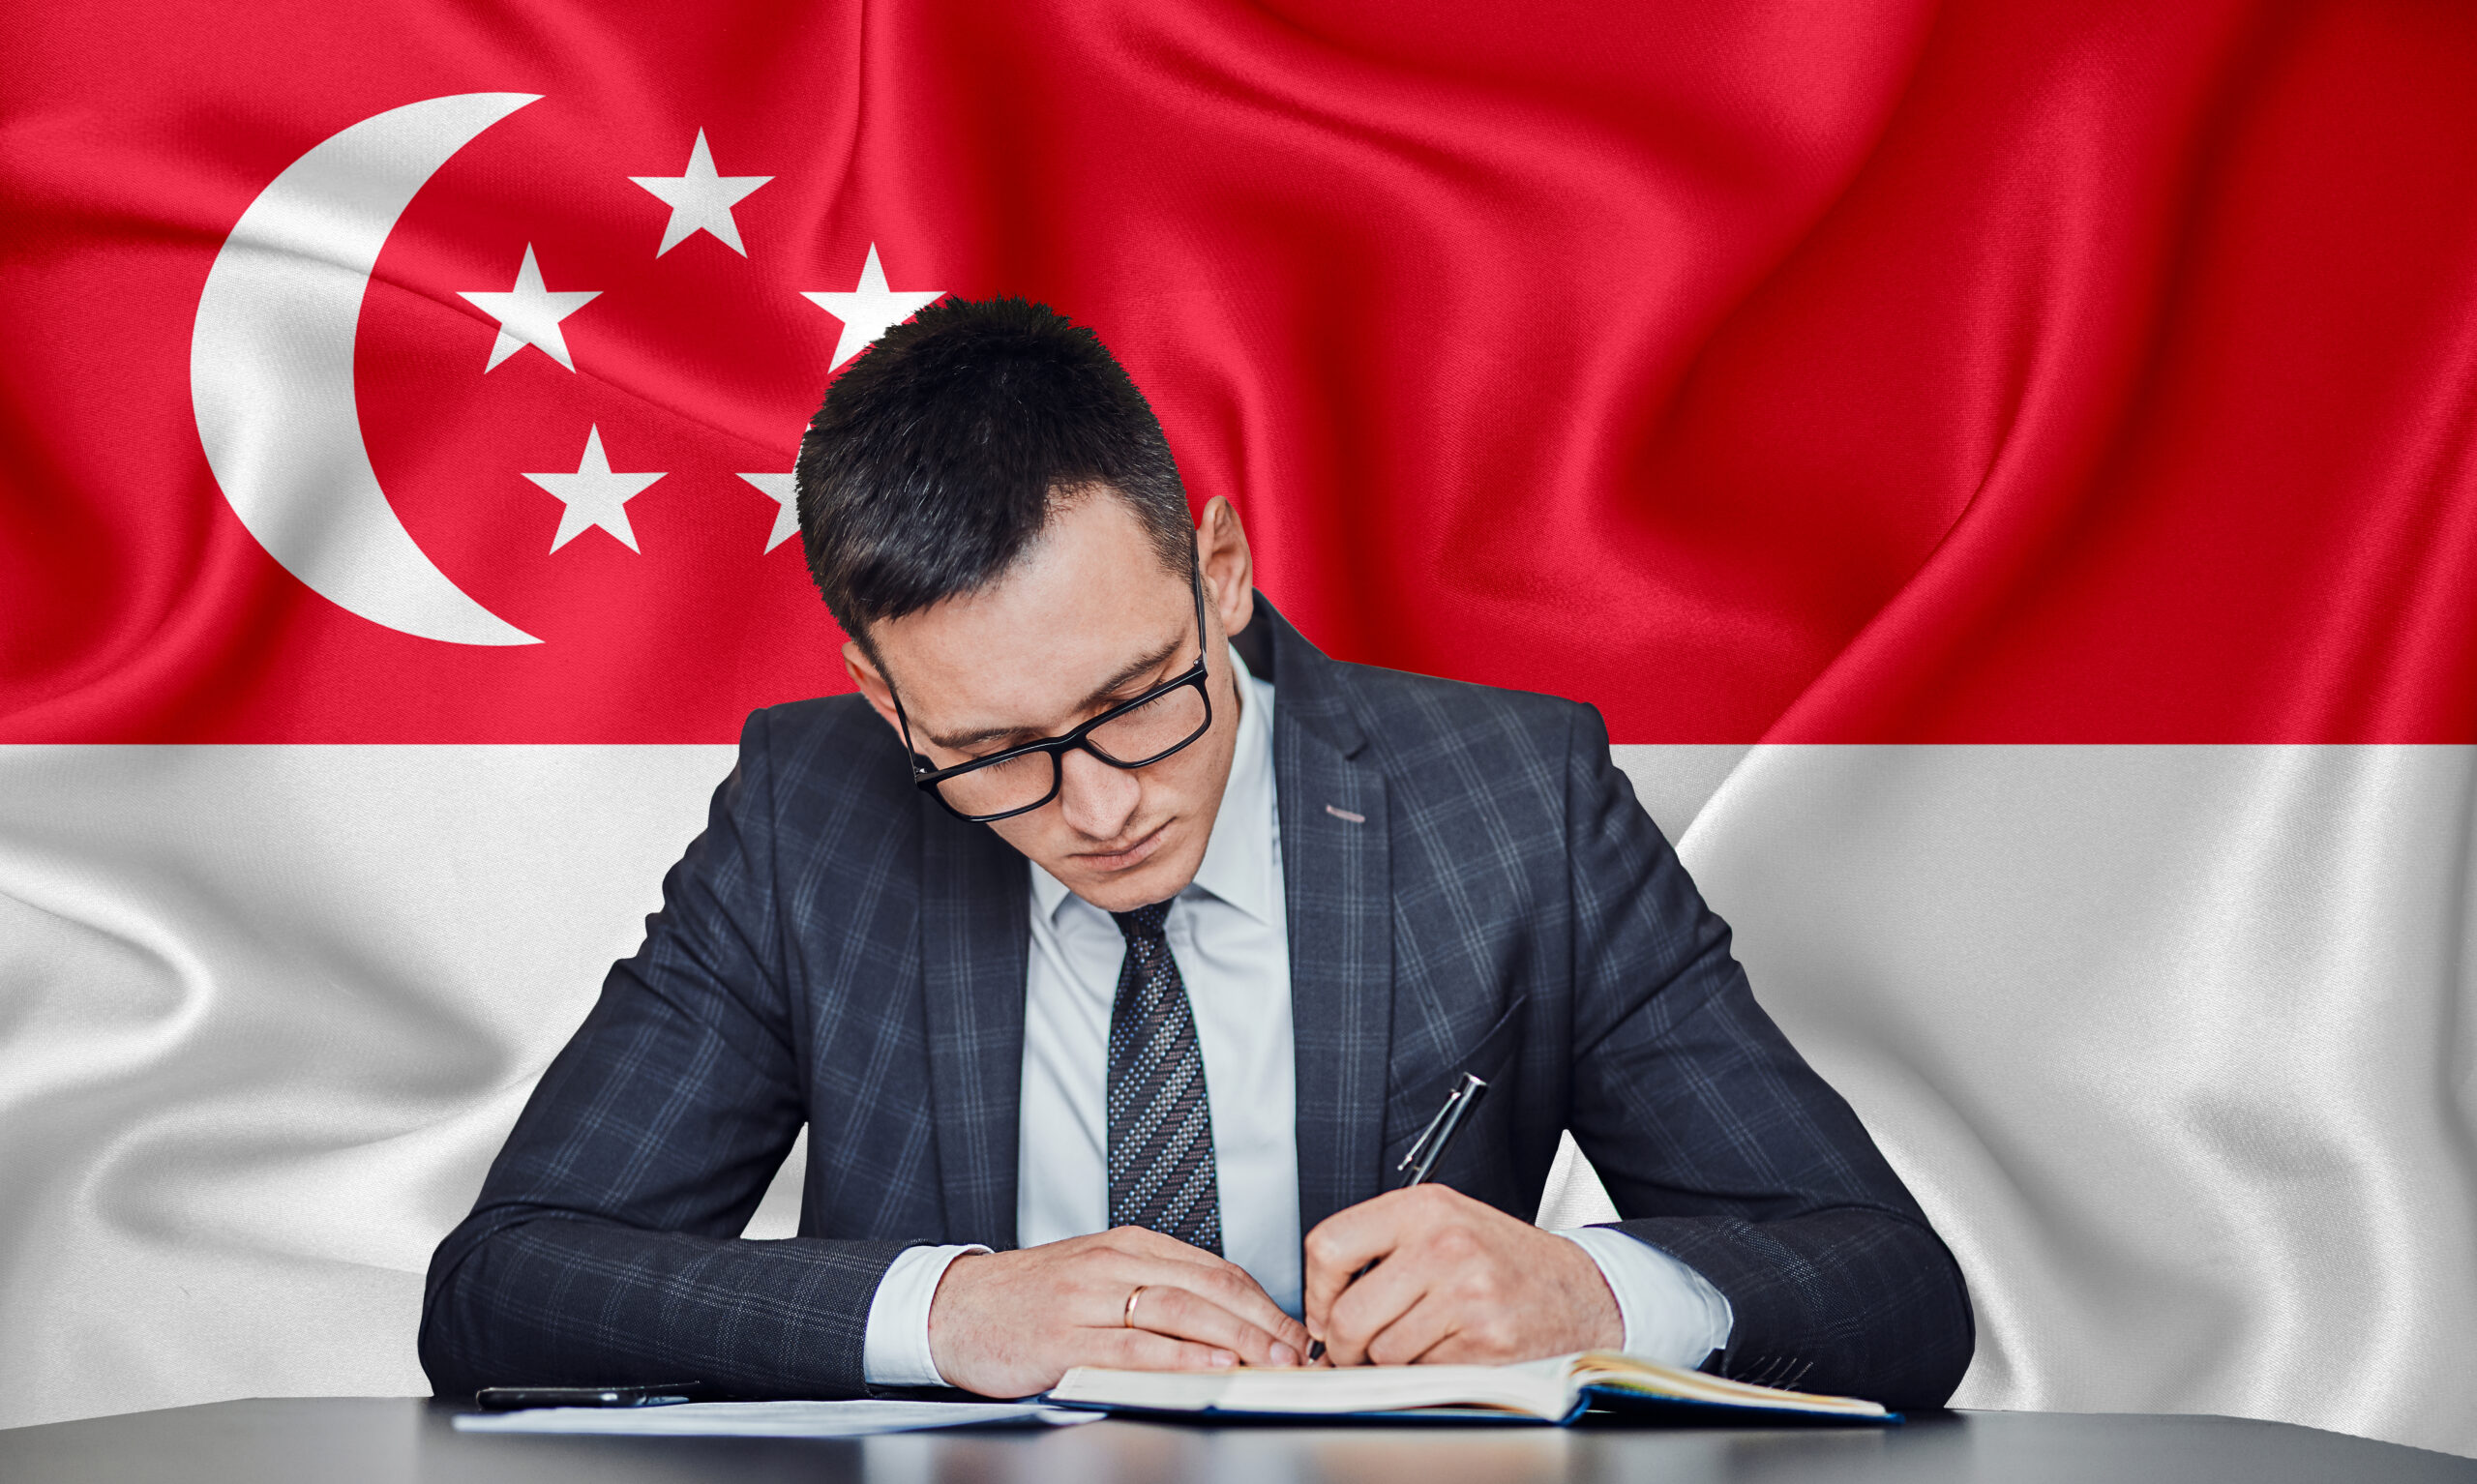 digital marketing lessons from the singapore presidential election